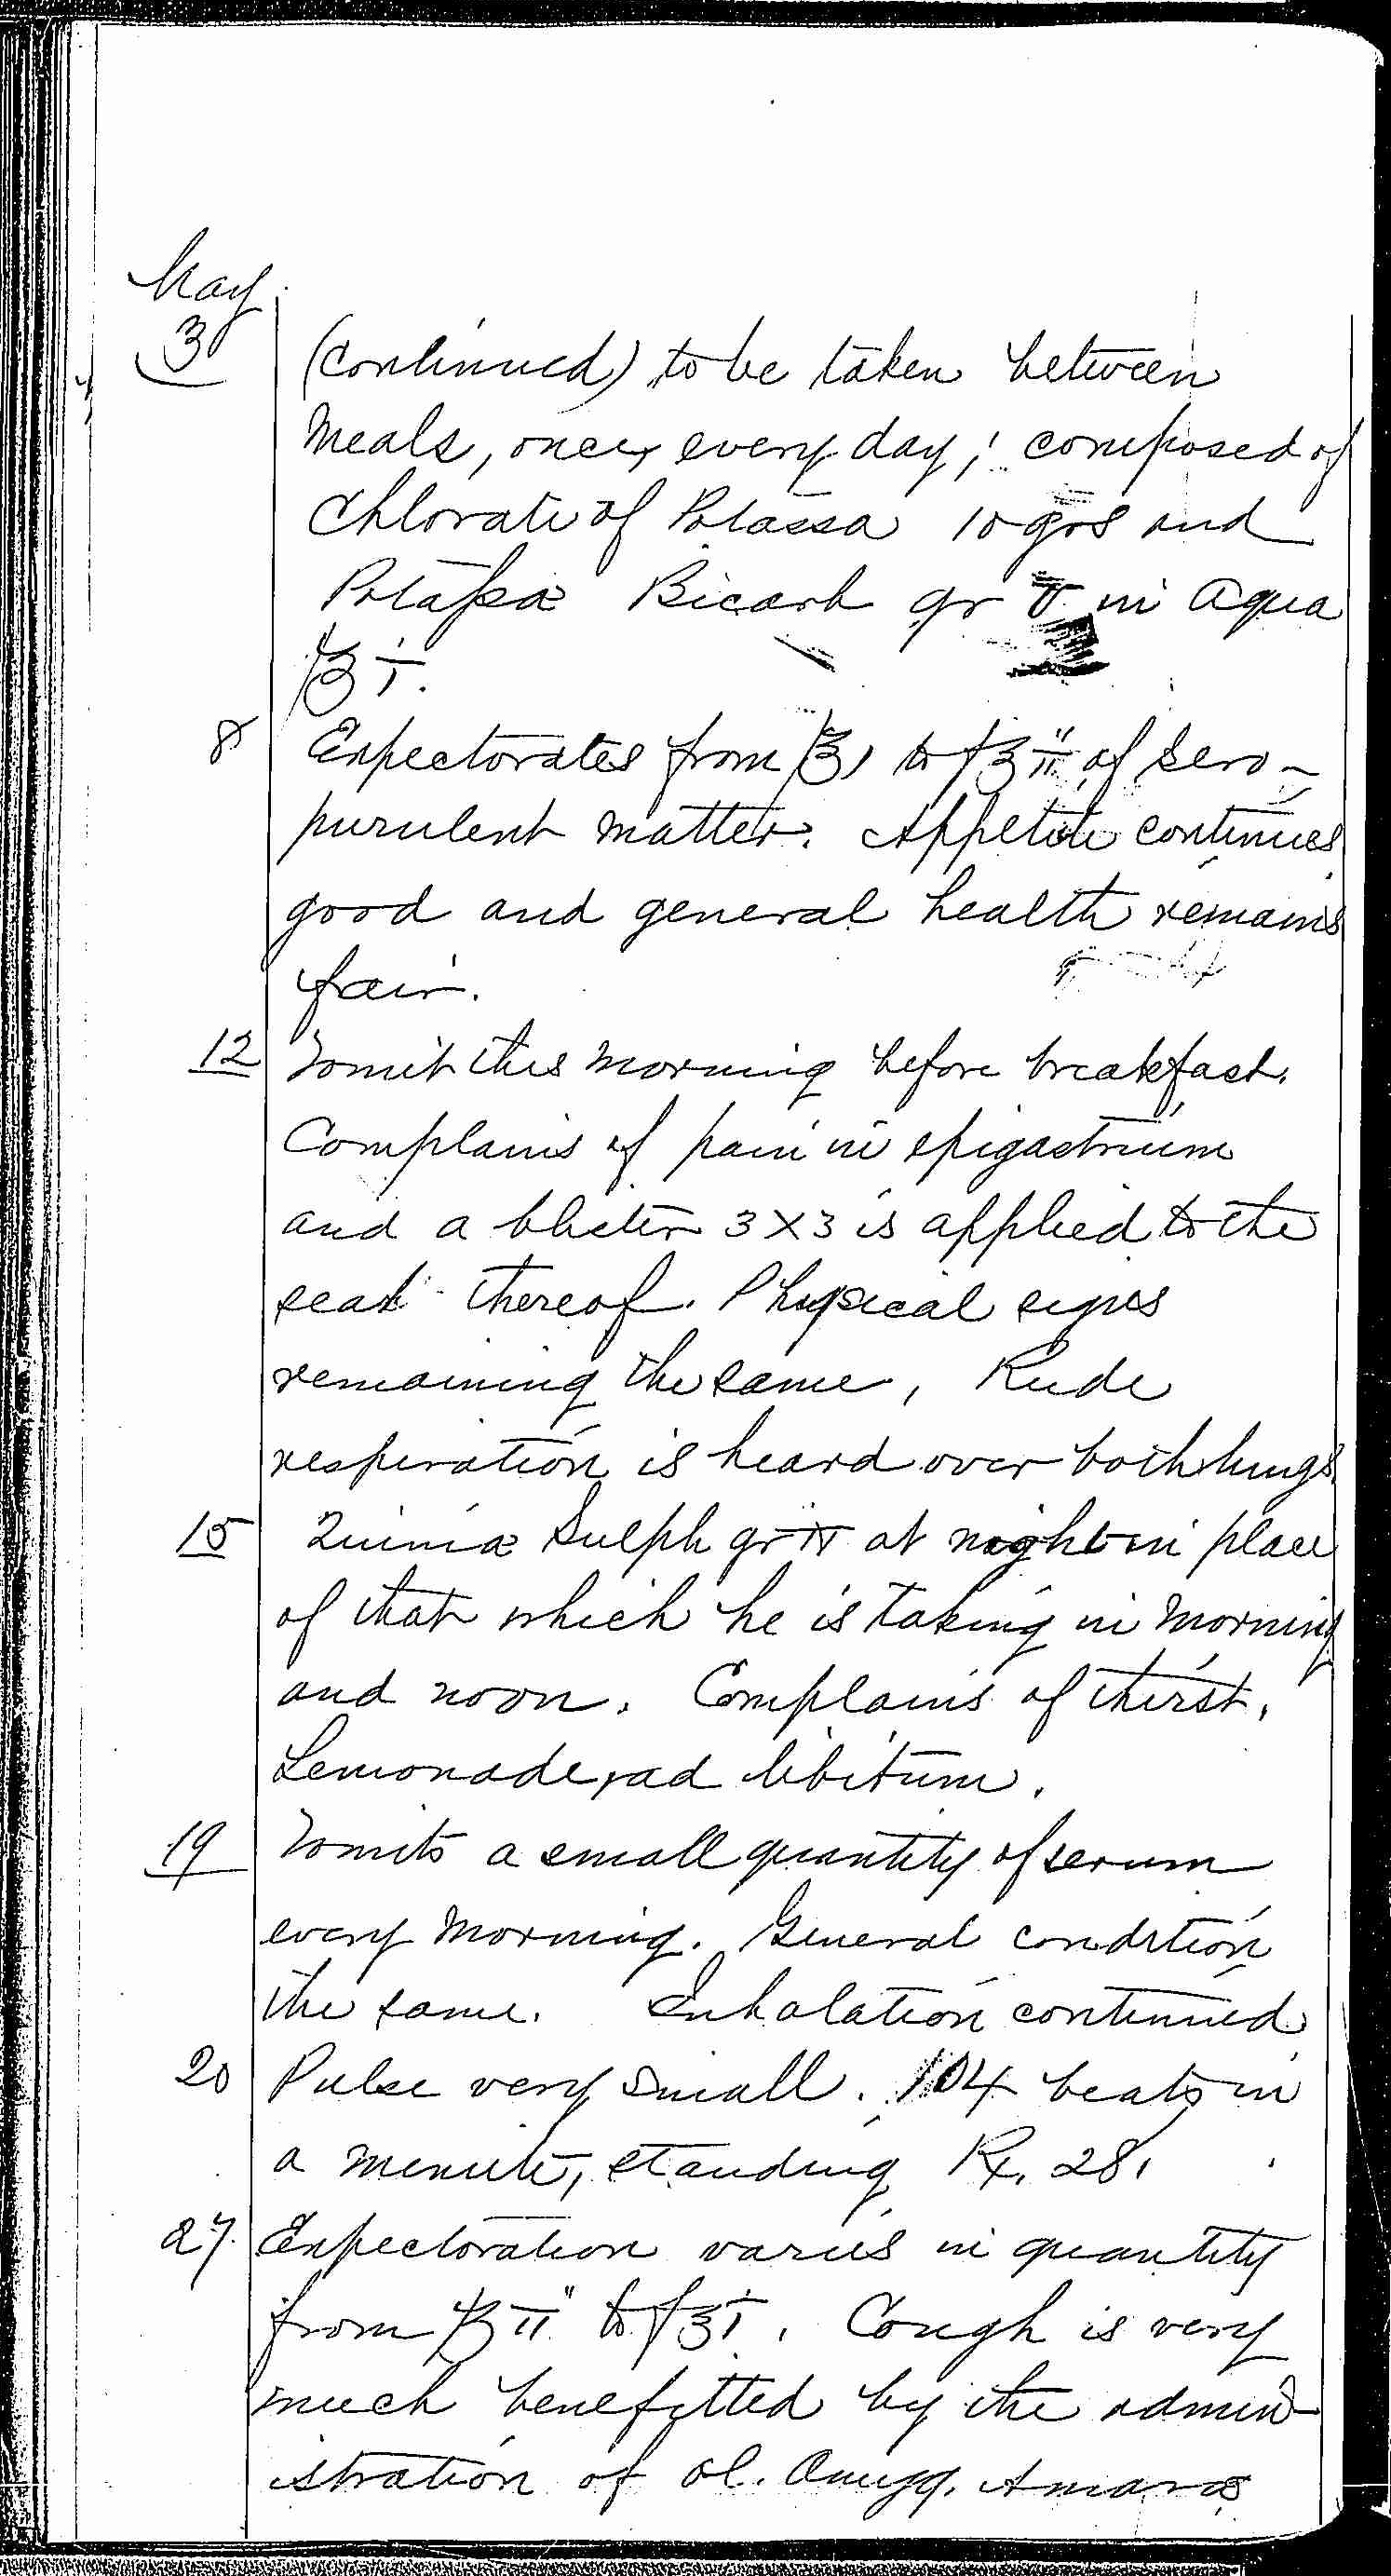 Entry for Richard Forn (page 20 of 21) in the log Hospital Tickets and Case Papers - Naval Hospital - Washington, D.C. - 1868-69